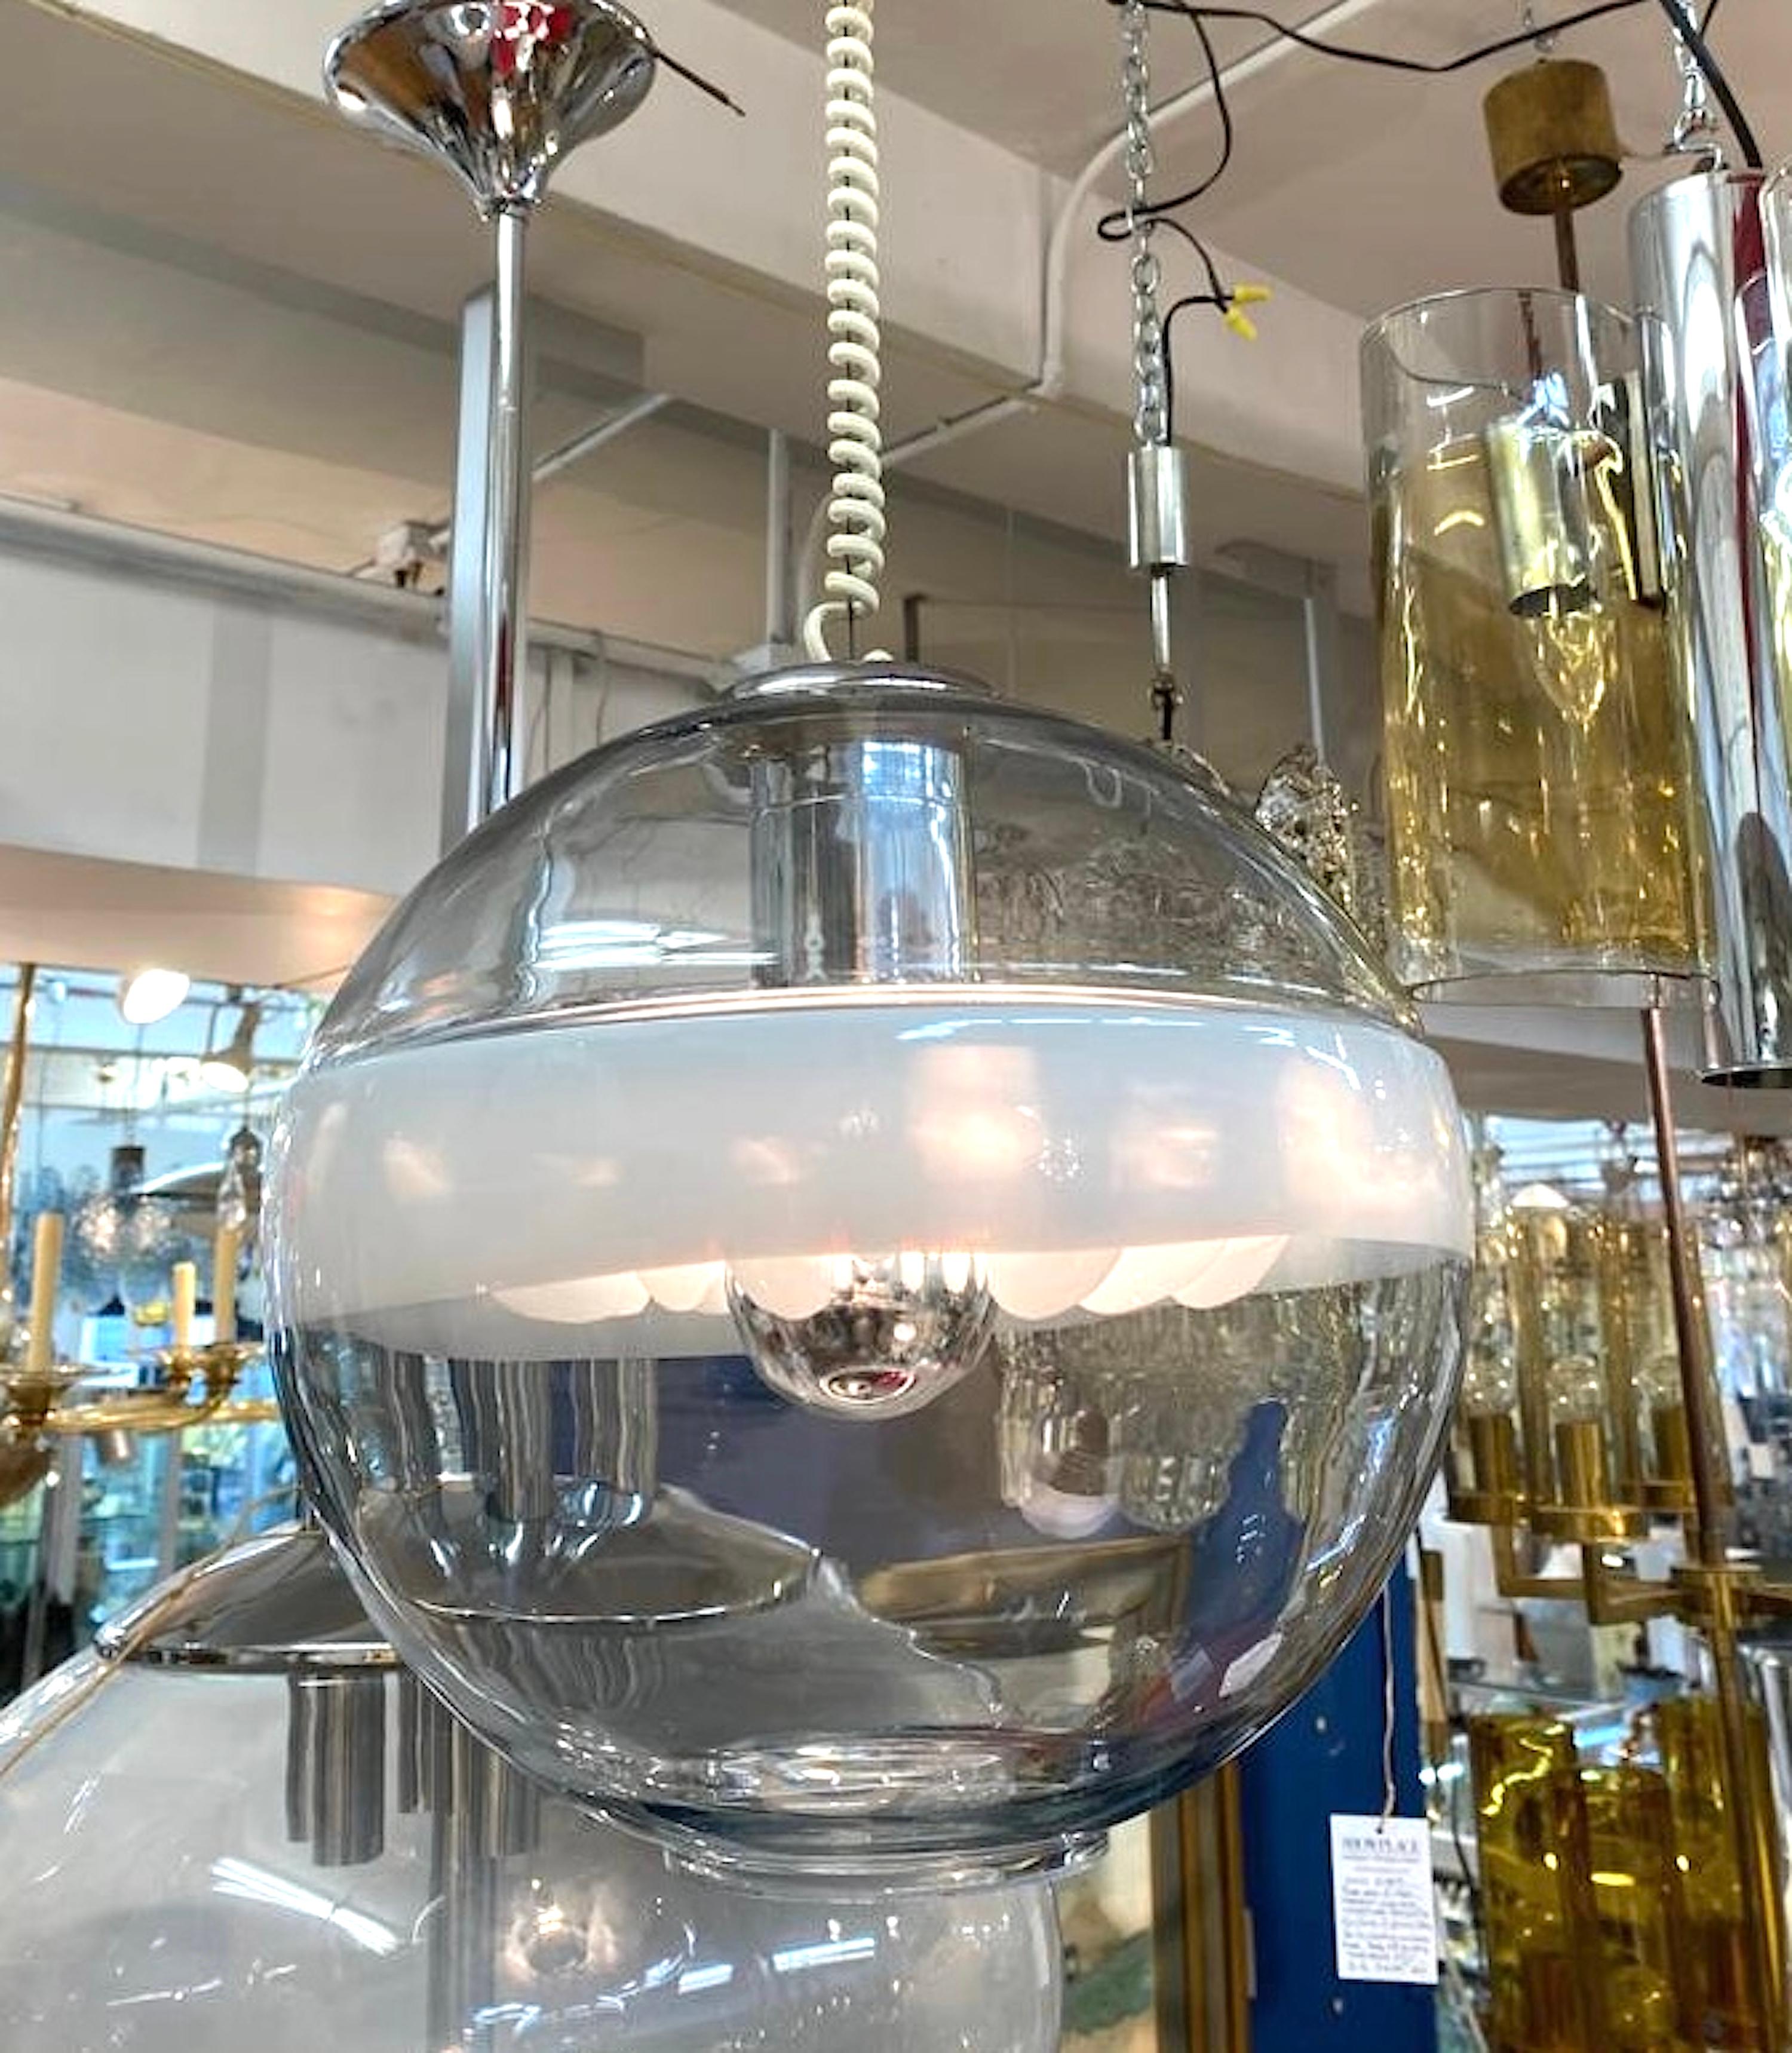 Sculptural 1970s glass pendant light from Murano by Italian lighting company Sothis. The globe shade is hand blown in clear and white glass. Around the middle of the globe is a wide white strip where there is an interior white glass divider all in